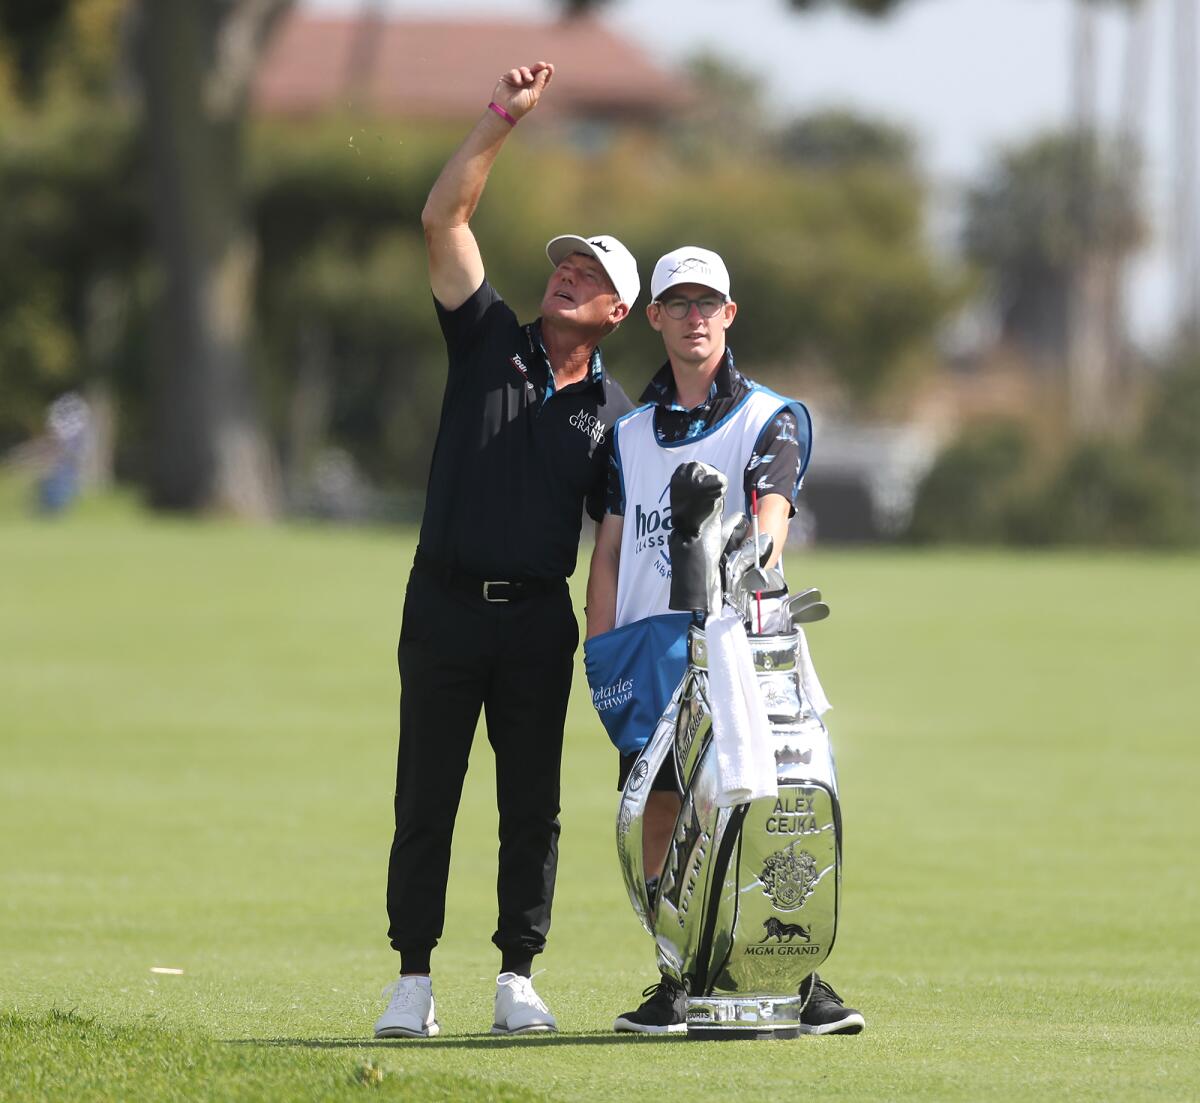 German player Alex Cejka checks the wind with his caddie on day one of the Hoag Classic on Friday.